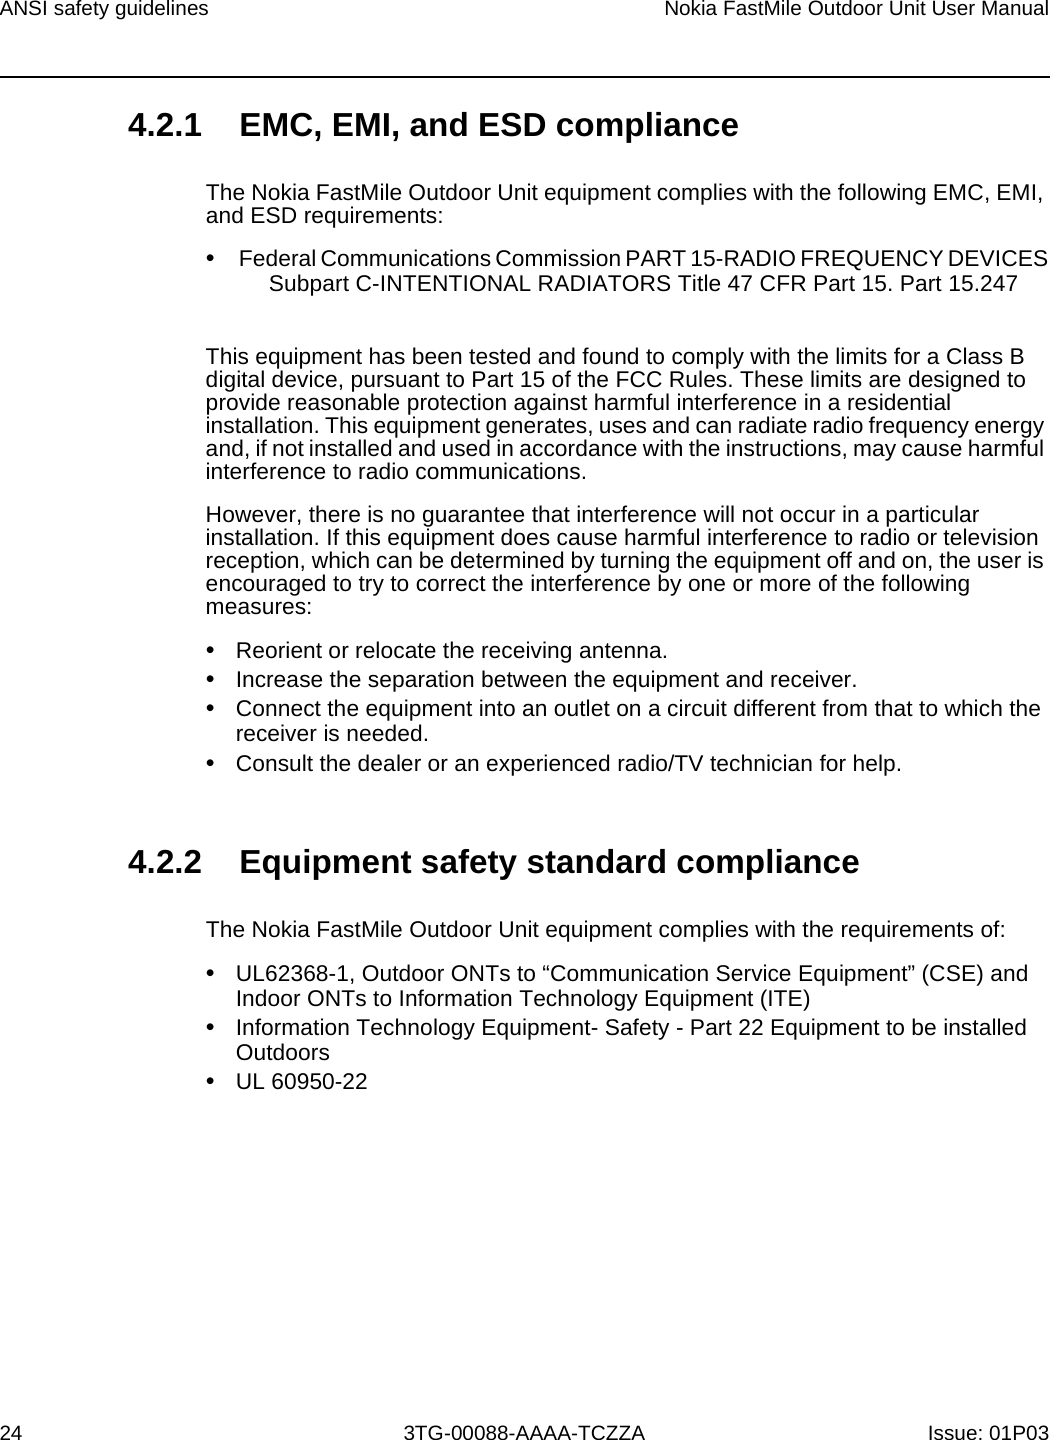 Page 22 of Nokia Bell 34003800FM20 FastMile Compact User Manual Nokia FastMile Outdoor Unit